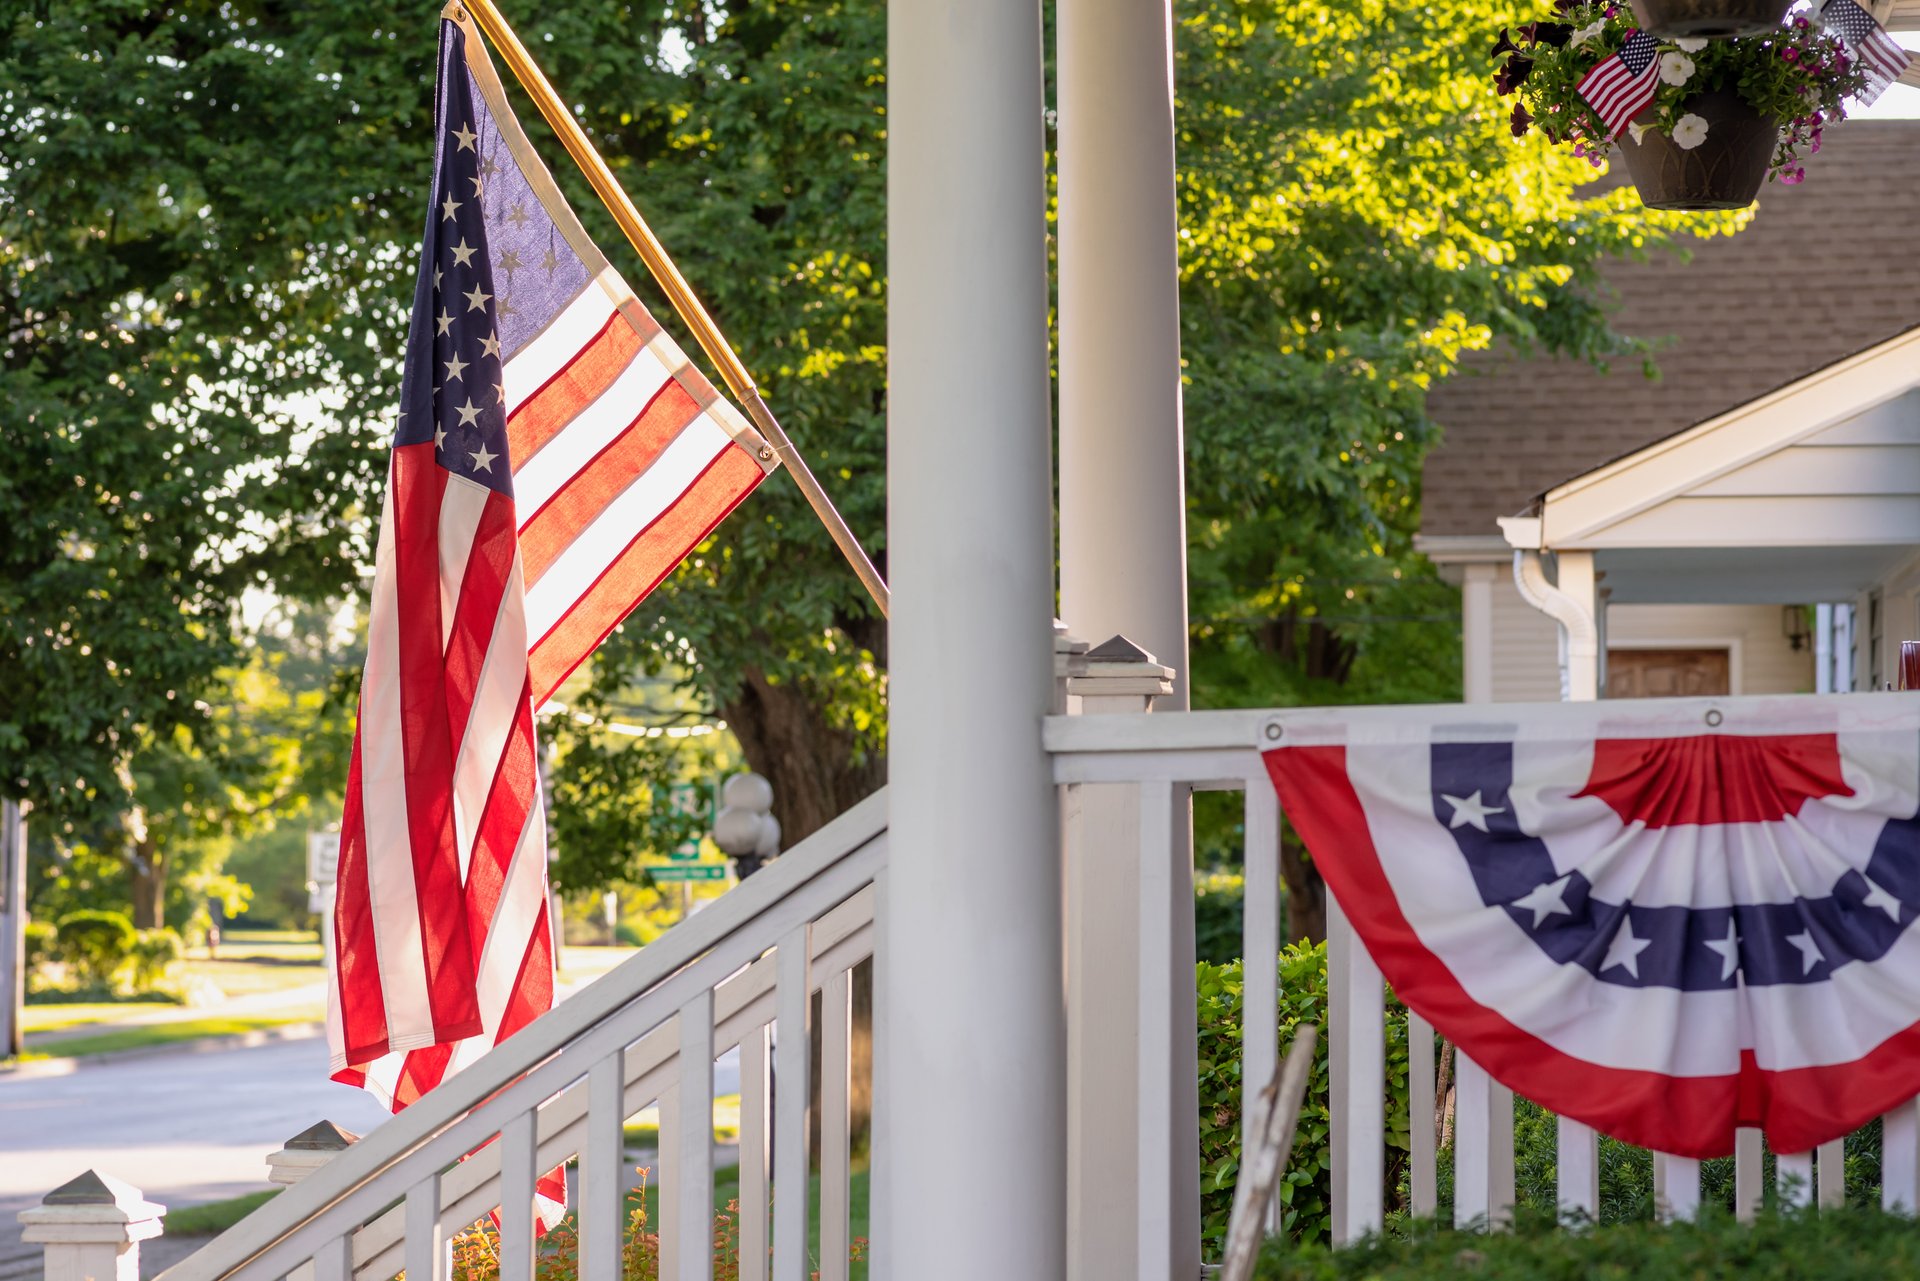 home-decorated-for-fourth-of-july-in-early-morning-light-flag-day-veterans-day-memorial-day_t20_ooZWlR